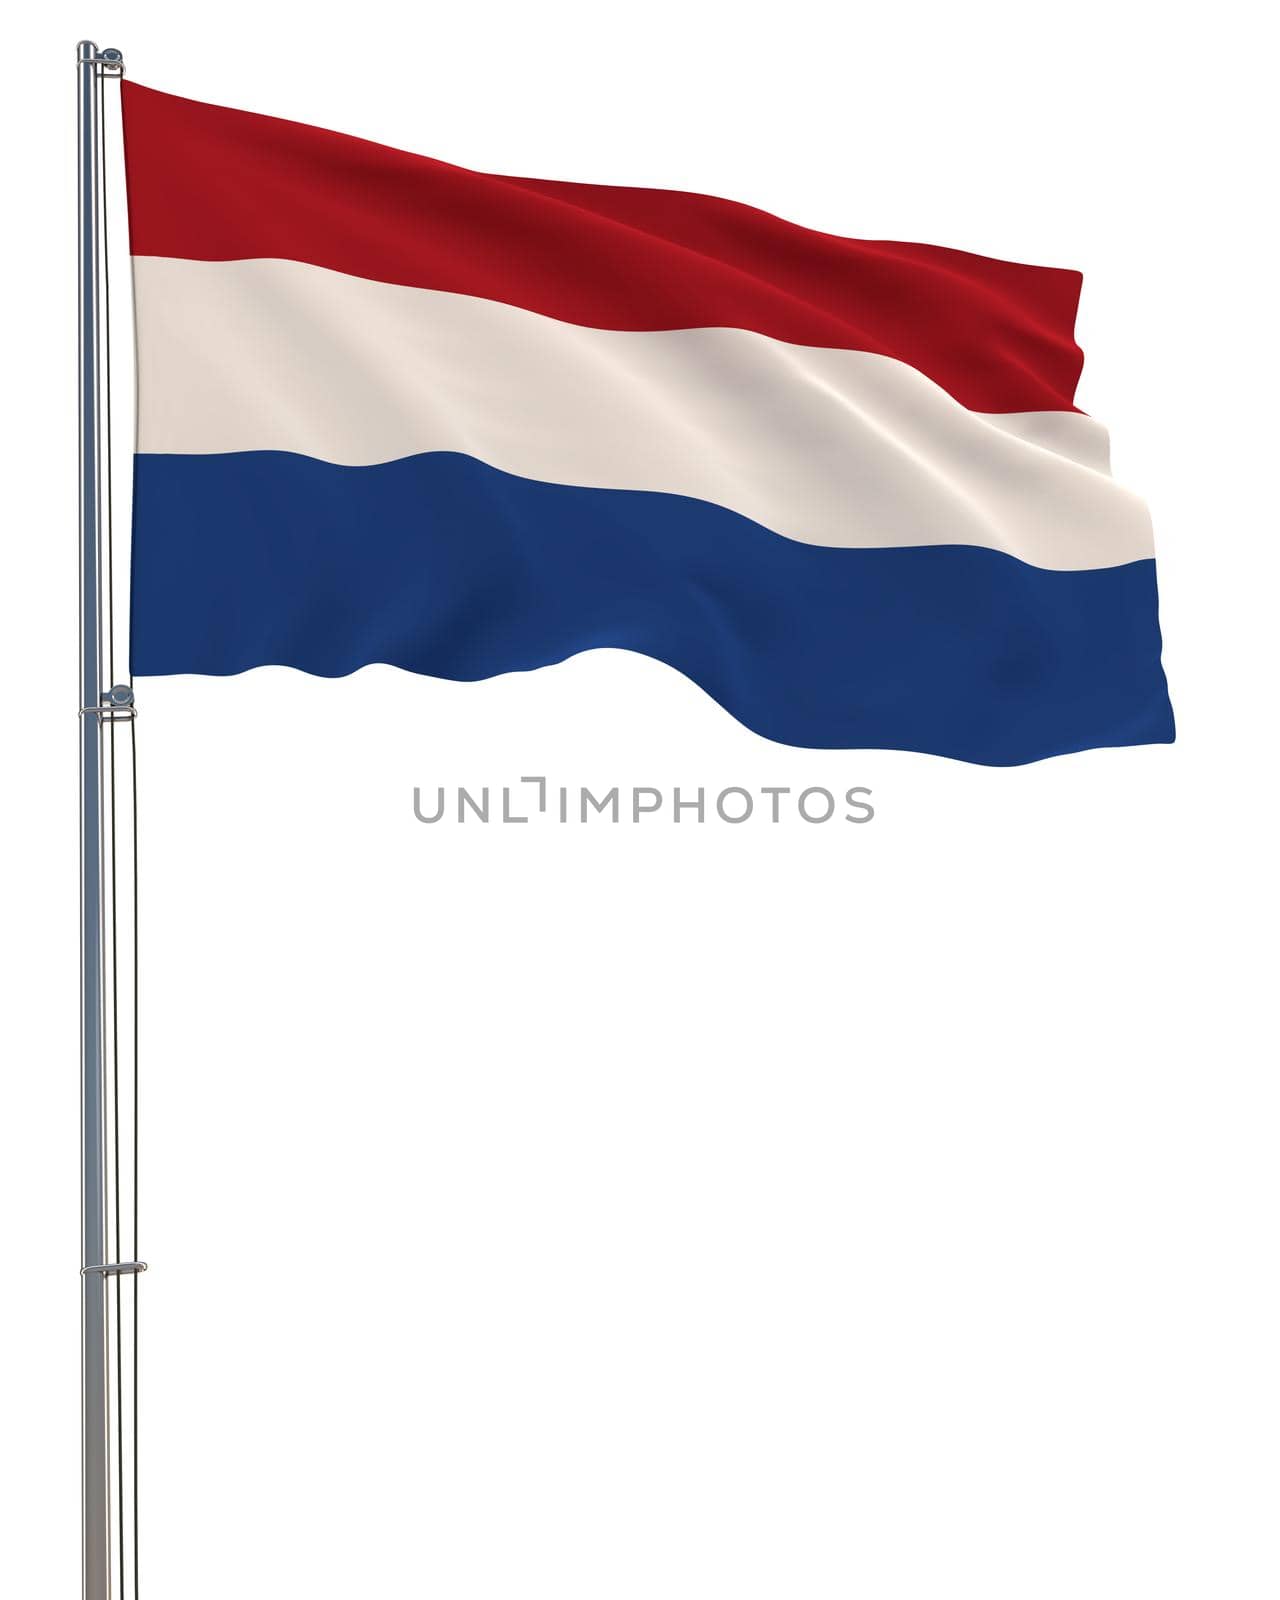 Netherlands flag waving in the wind, white background, realistic 3D rendering image